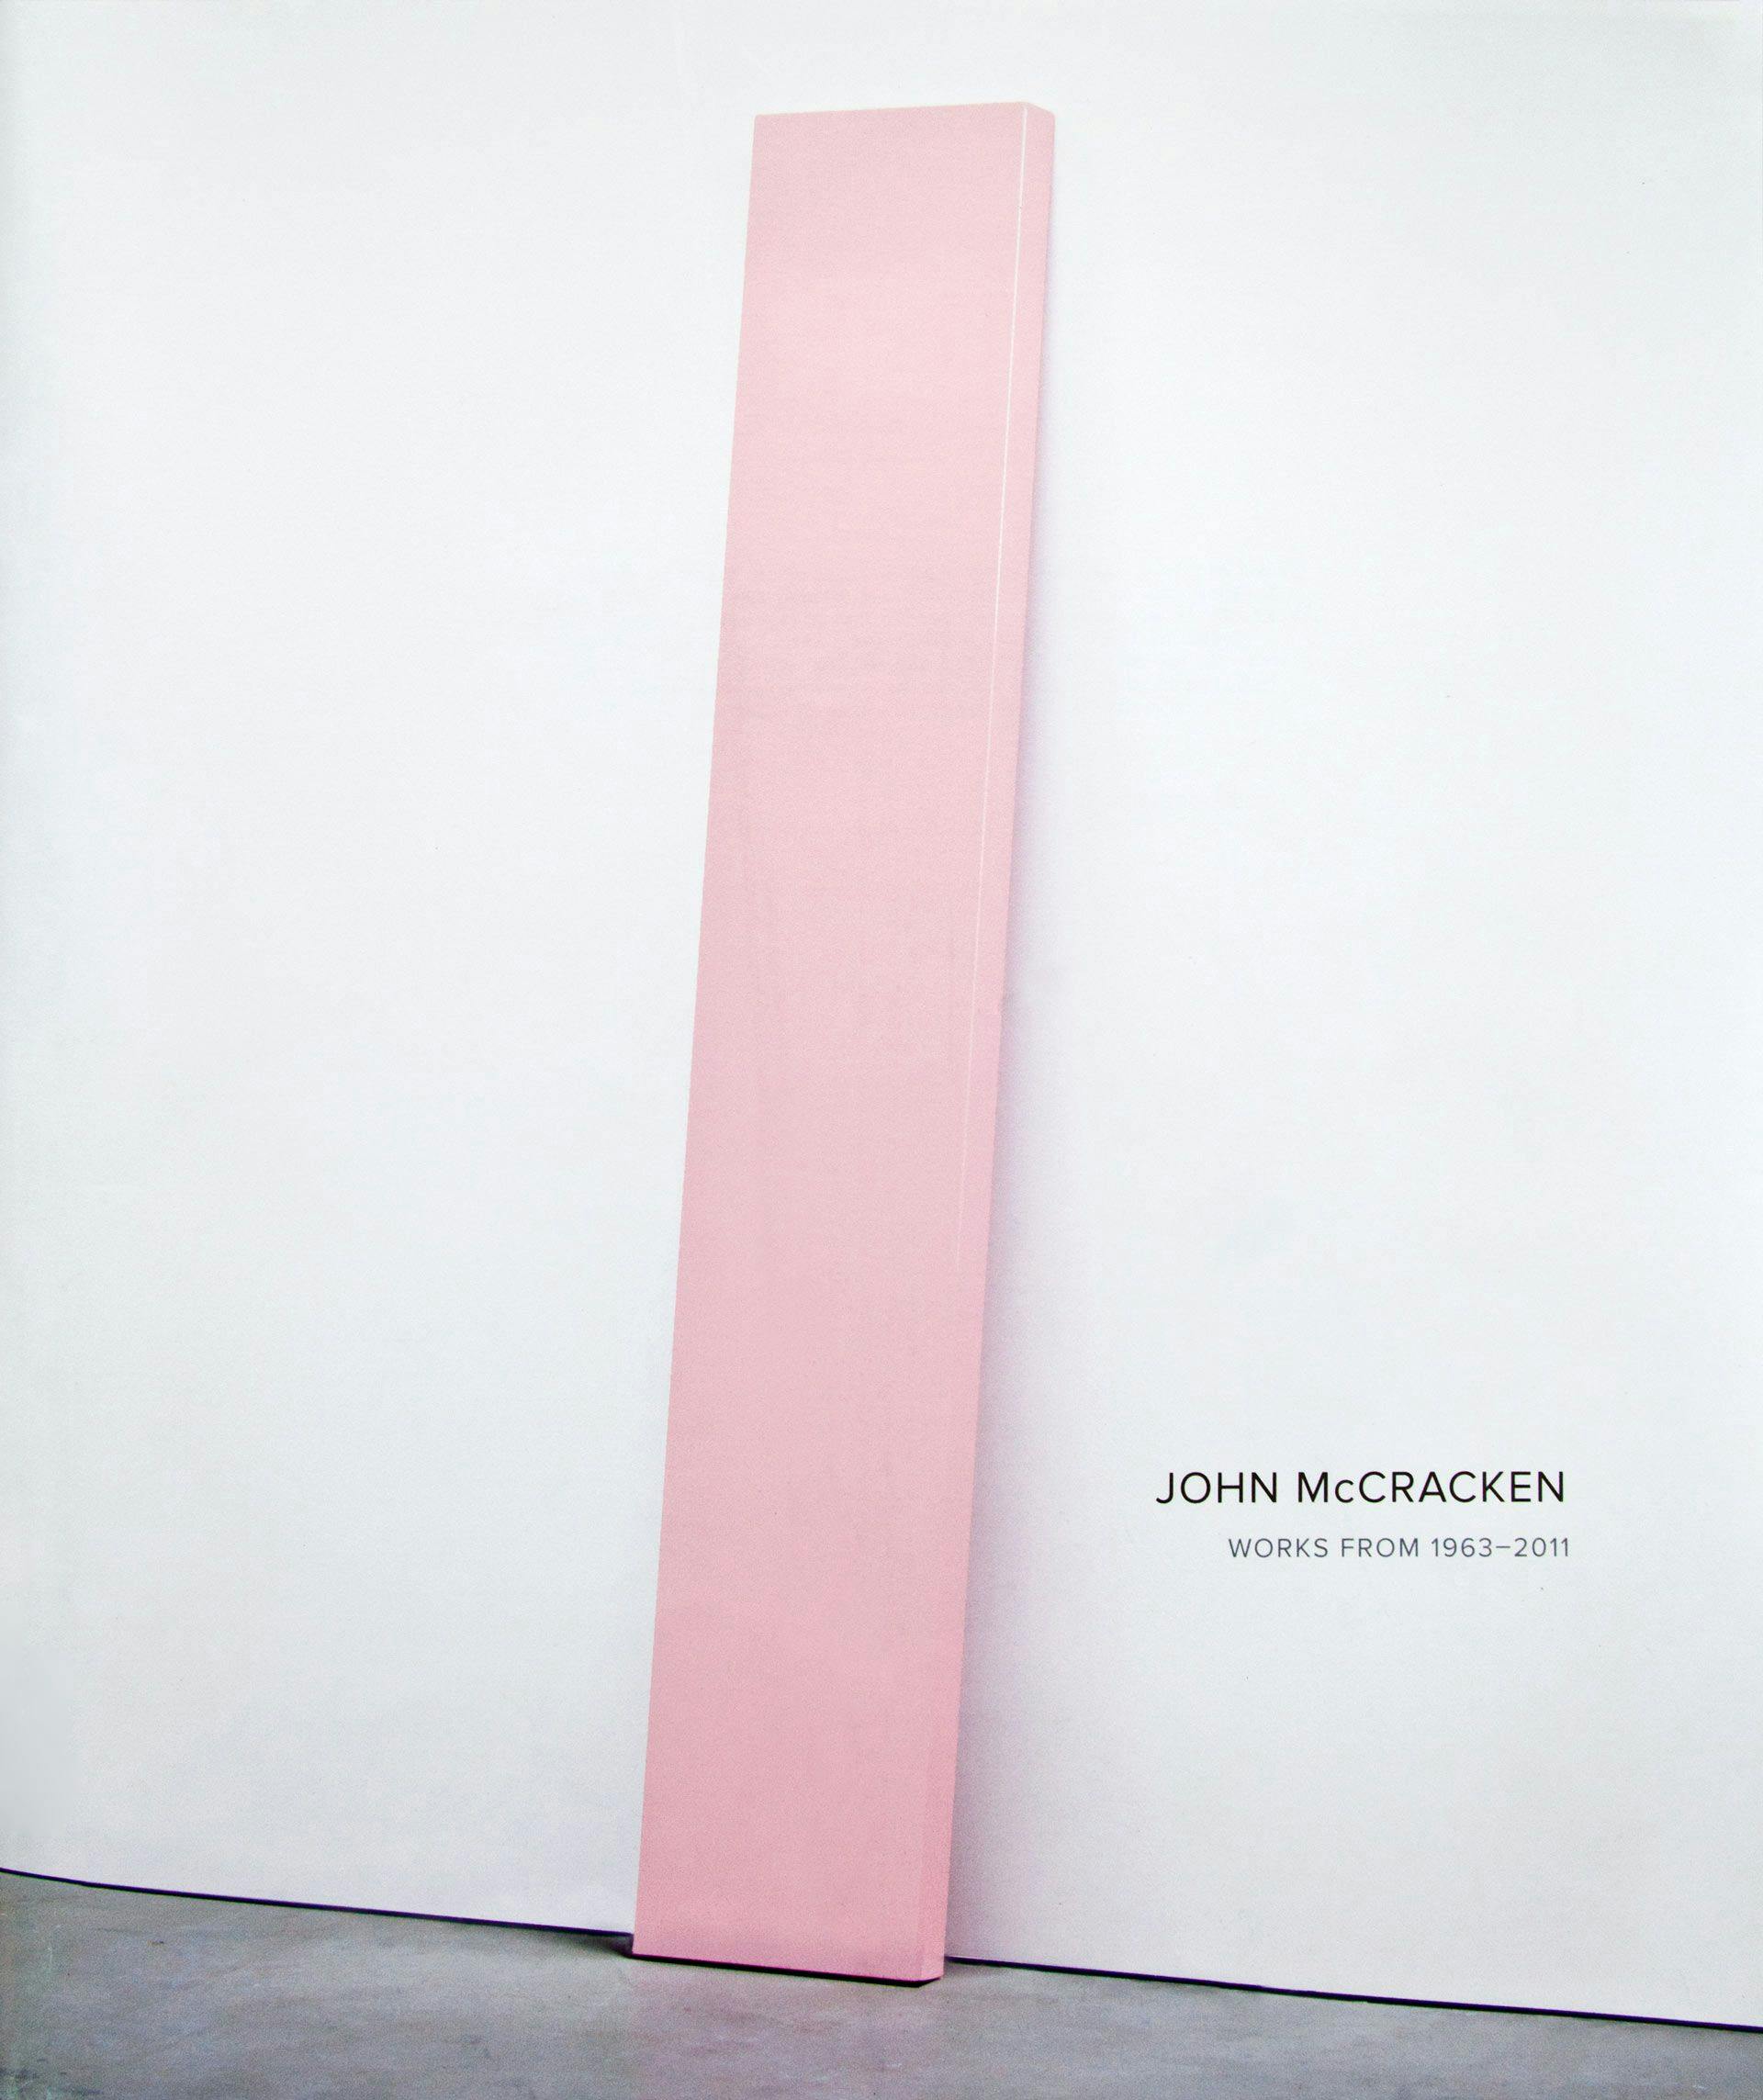 The cover of John McCracken: Works from 1963-2011, published by David Zwirner Books / Radius Books, 2014.